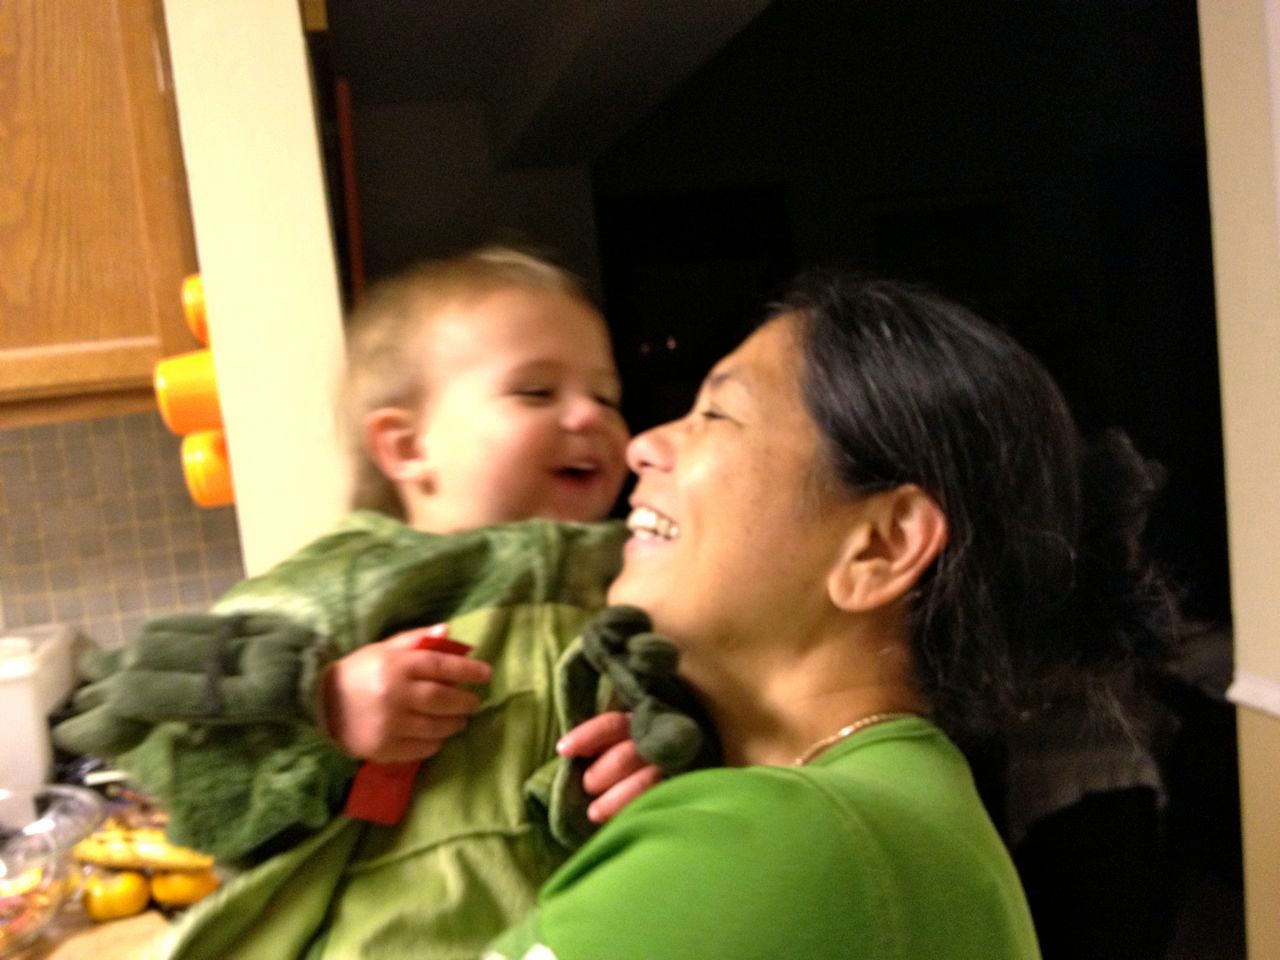  Even though this is blurry, I love the sweet smile shared between my Mom and Mr. Bananas 